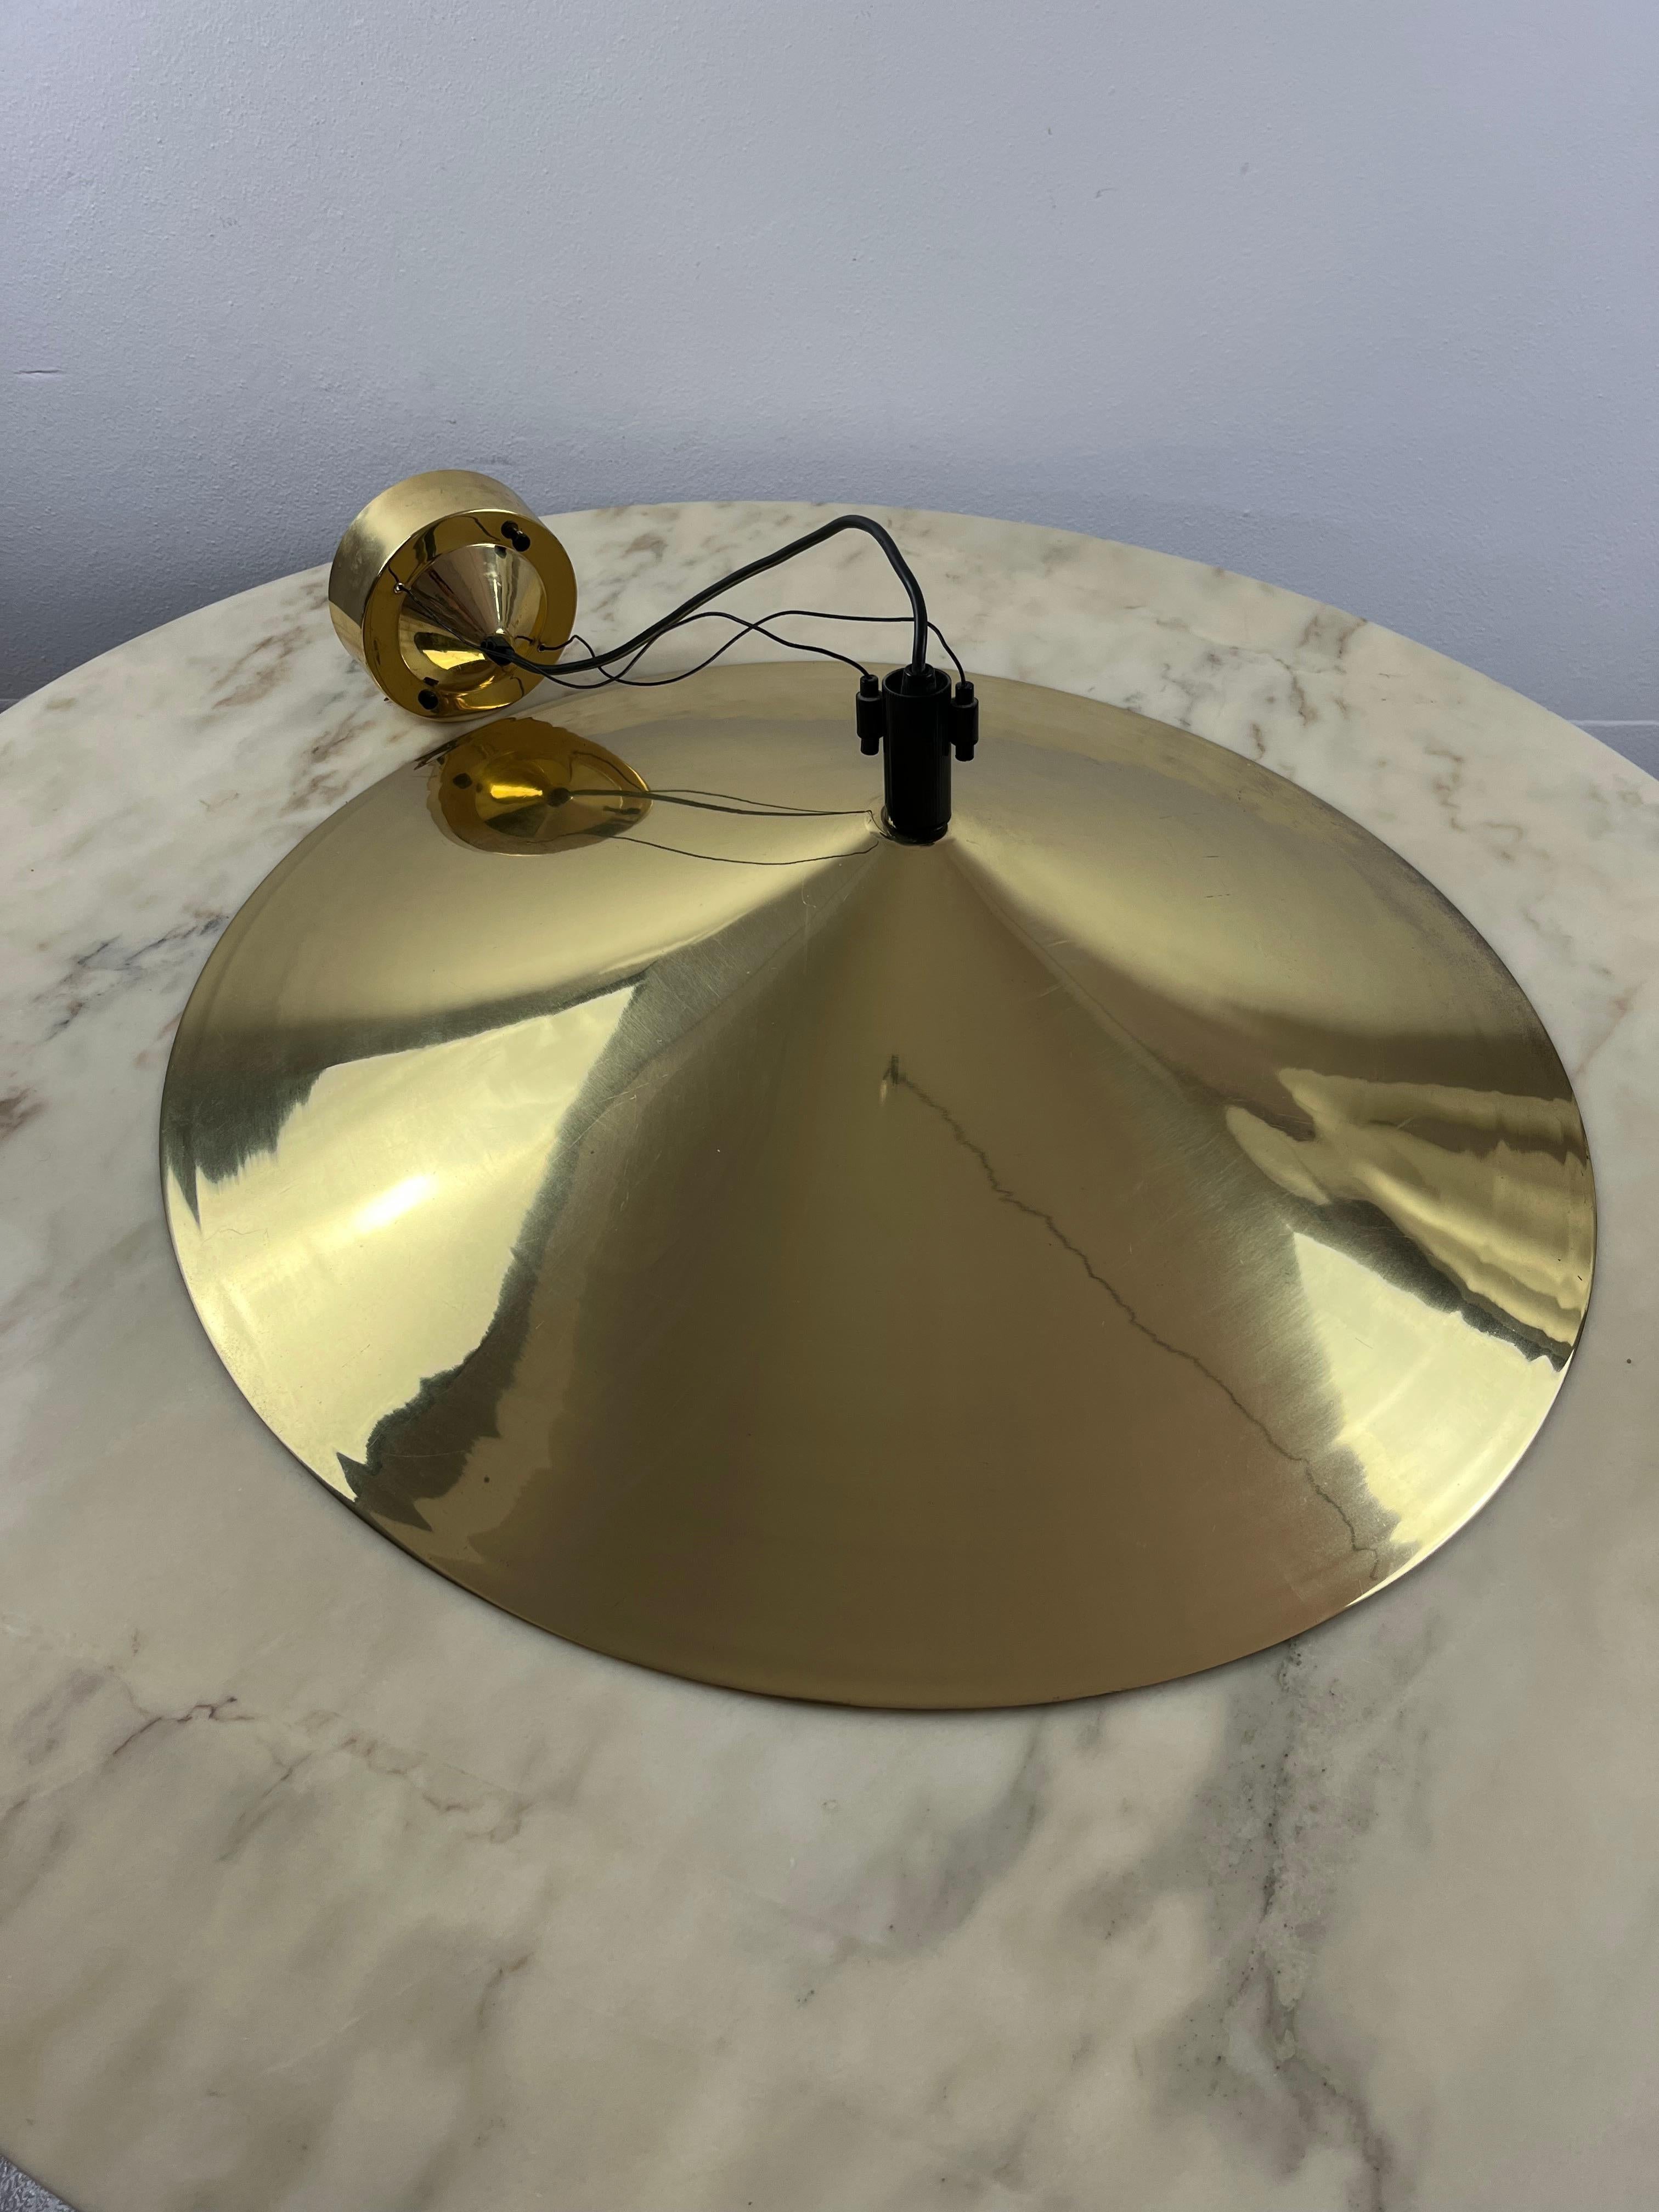 Vintage Golden Aluminium pendant lamp, Italy, 1970s
Found in an interior designer's apartment, it has a diameter of 71 cm!
The bottom has a reflective material, as evidenced by the descriptive photographs.
It is a very beautiful object from the 70s.